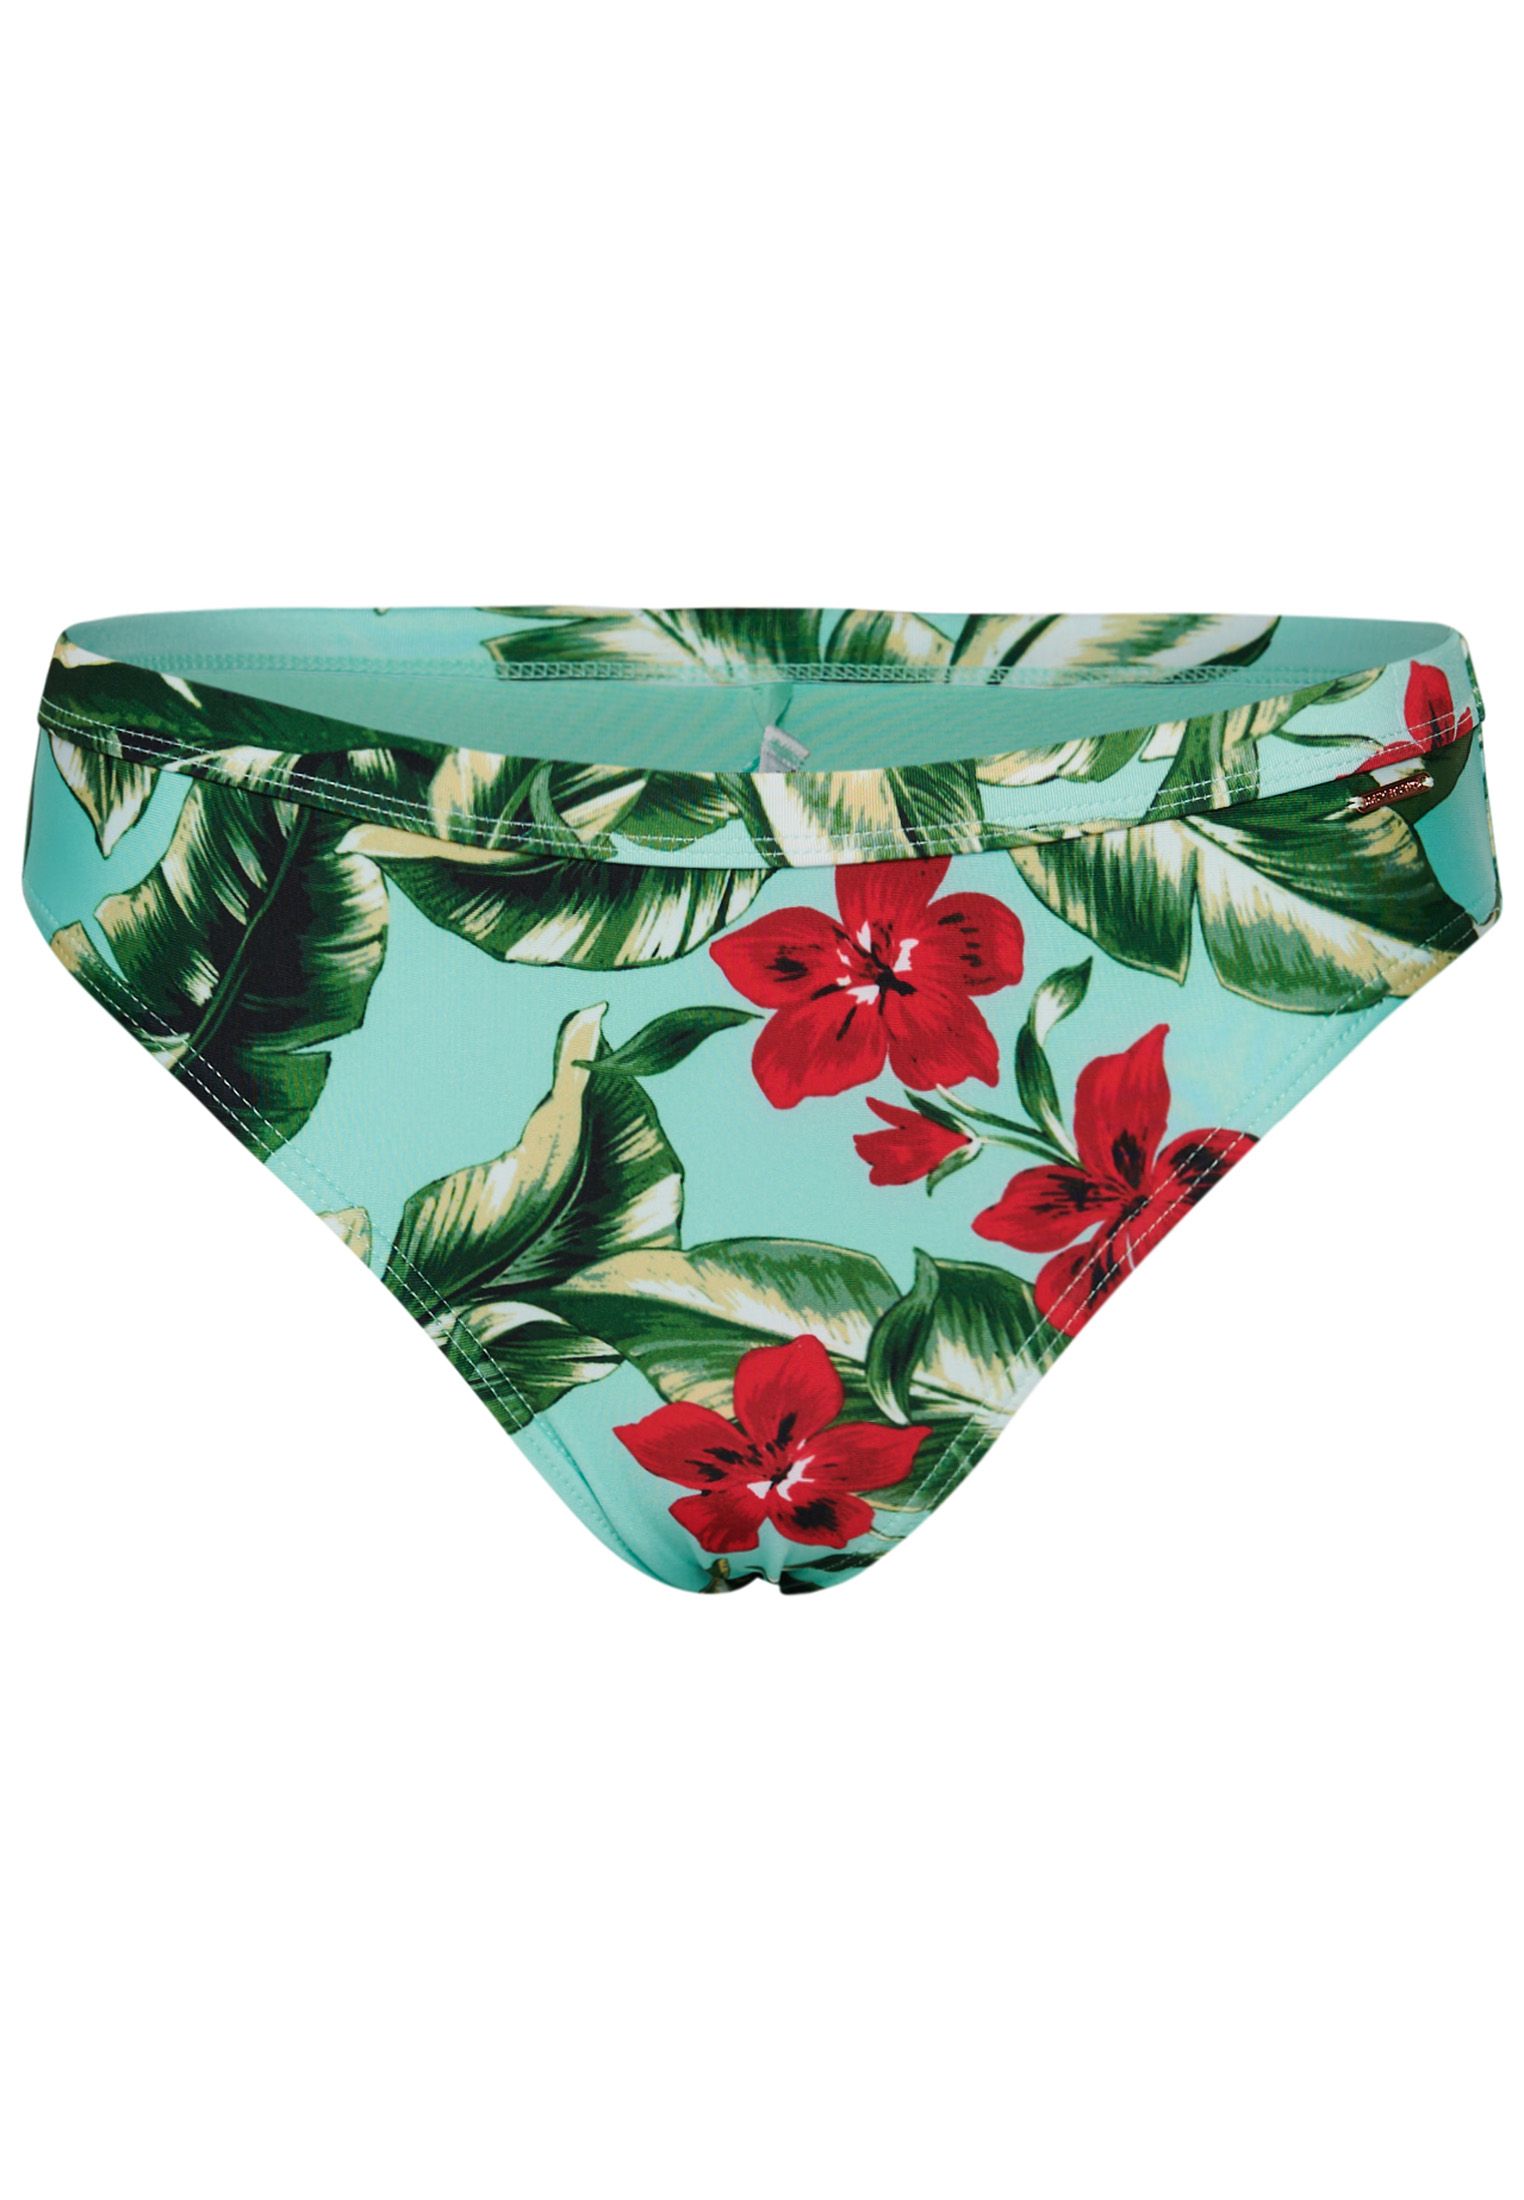 Hawaiian print is an iconic part of the classic vintage vibe, and we love how it evokes a retro style. Whether you're travelling far or staying at your local spots this sunny season, you can bring the holiday spirit with you anywhere you go. These briefs have a bold chic, whether worn by themselves or beneath a day dress on those lovely long days.Hipster brief styleAll over printElasticated waistMetal Superdry tabRecycled contentsPlease note, due to hygiene reasons we are unable to offer an exchange or refund on swimwear unless the hygiene strip is still intact. This does not affect your statutory rights.By 2050, there will be more plastic in the ocean than fish.Help save plastic from polluting the earth. Wear this instead.This new swimwear fabric is made from 80% recycled post-consumer waste.Indo green leaves and red flowers against a delicate mint